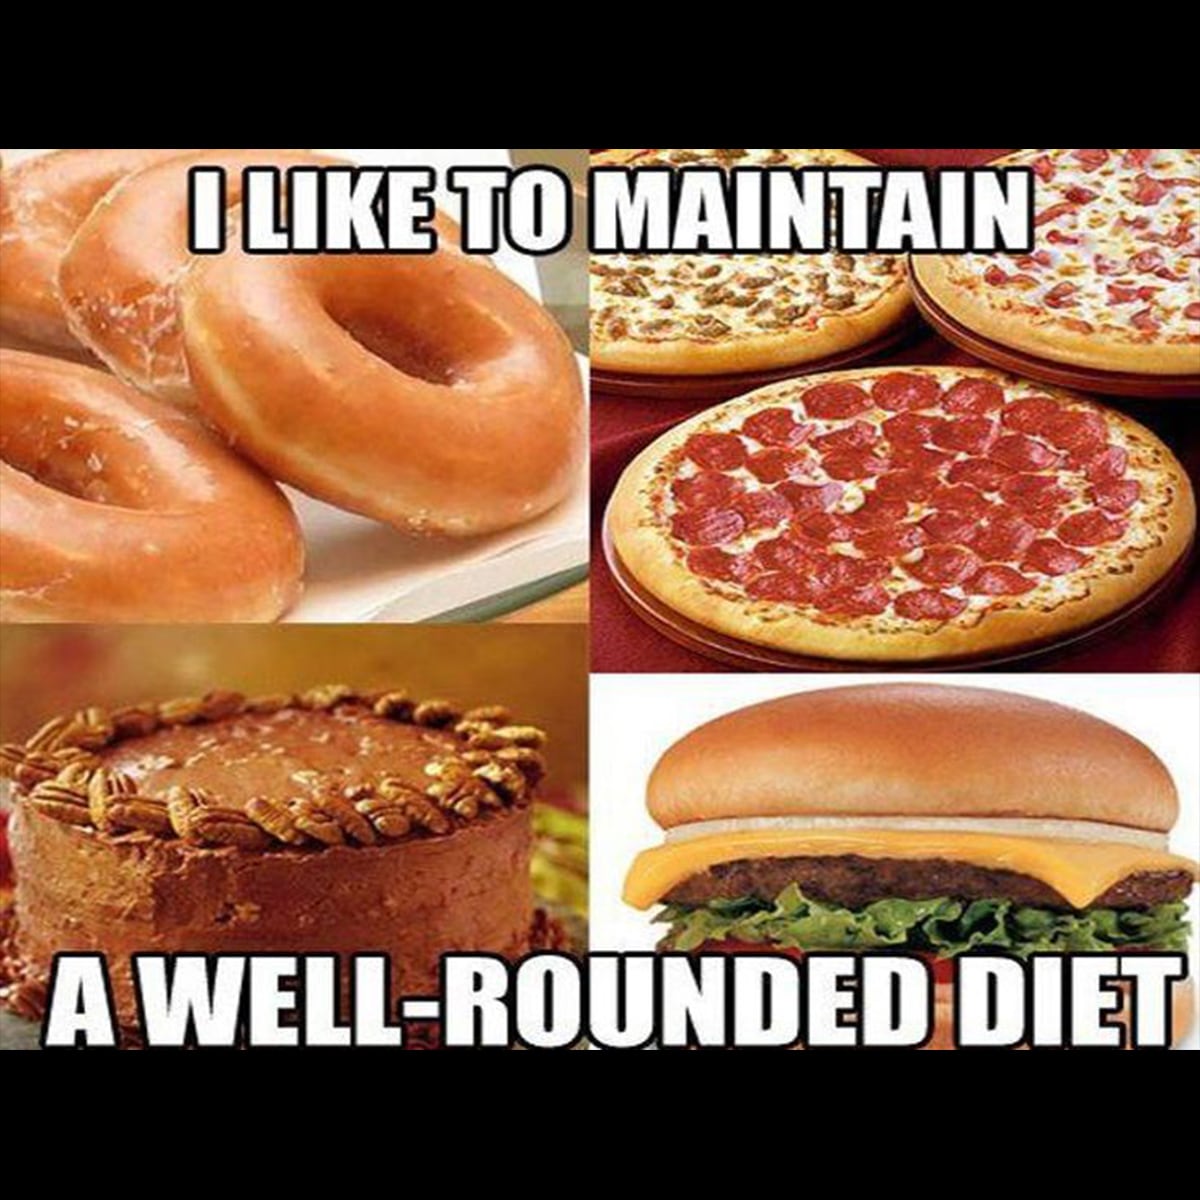 I like to maintain a well-rounded diet.